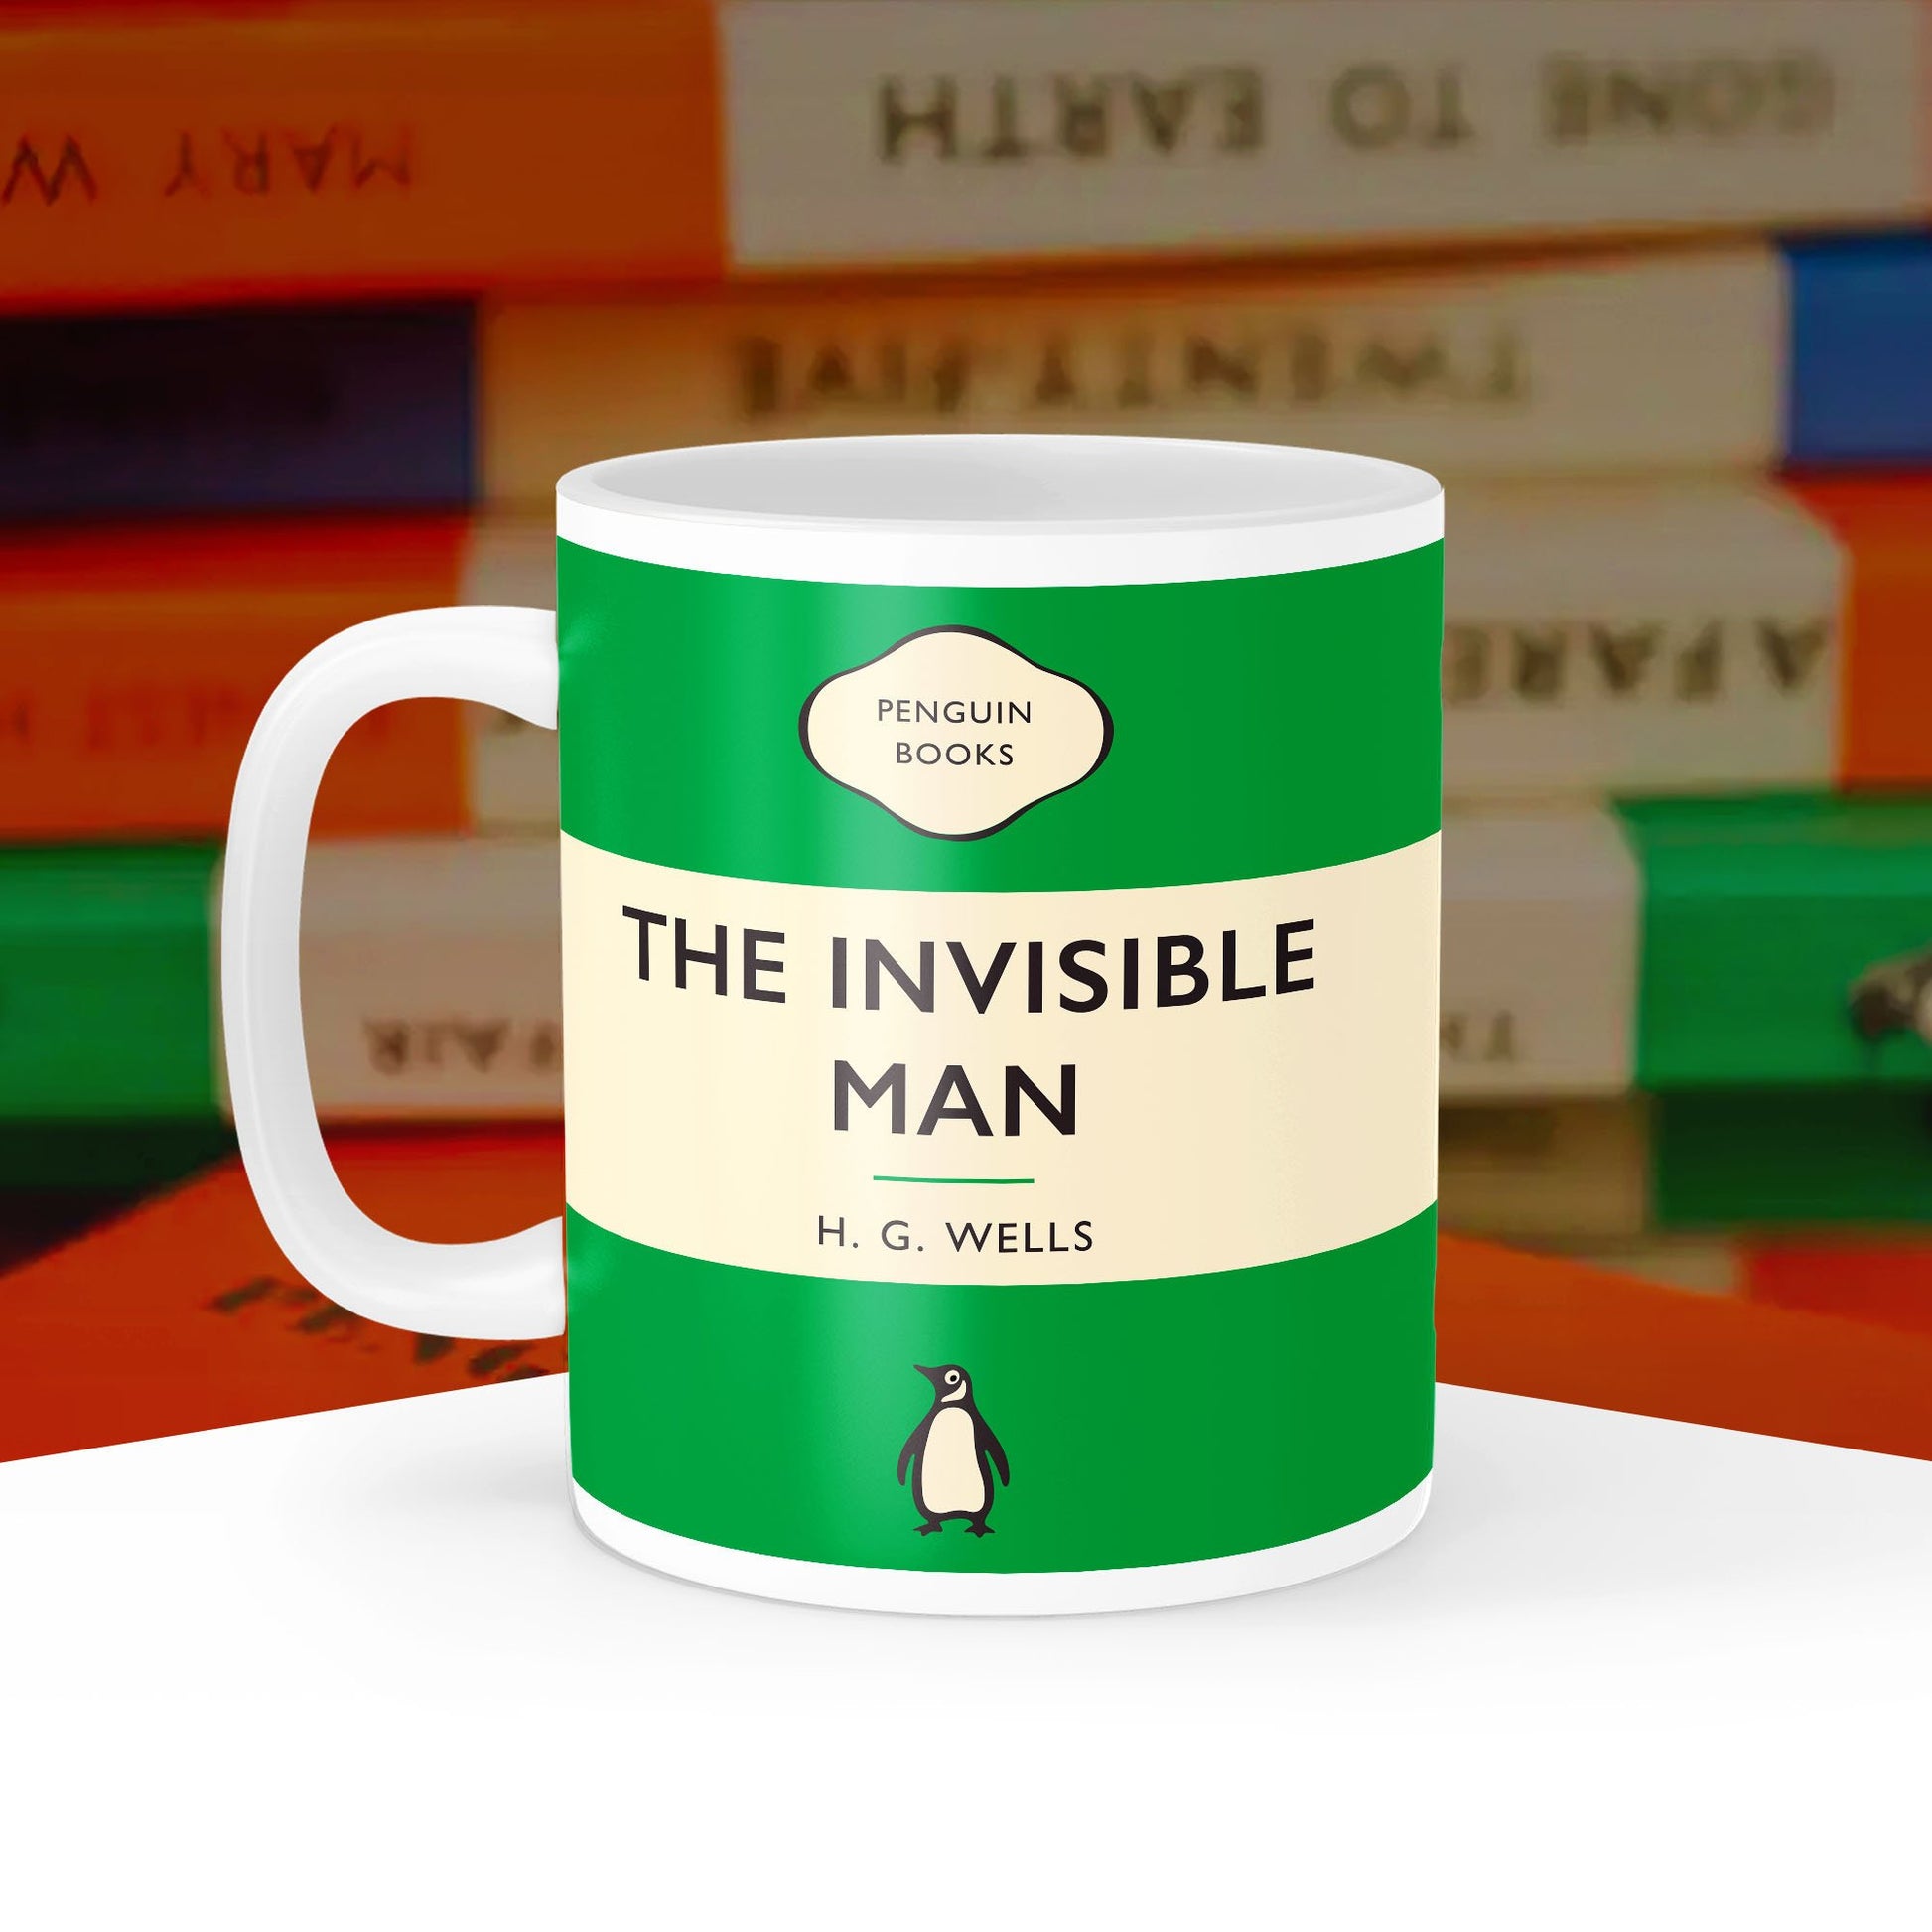 The Invisible Man - H. G. Wells Penguin Book Cover Mug